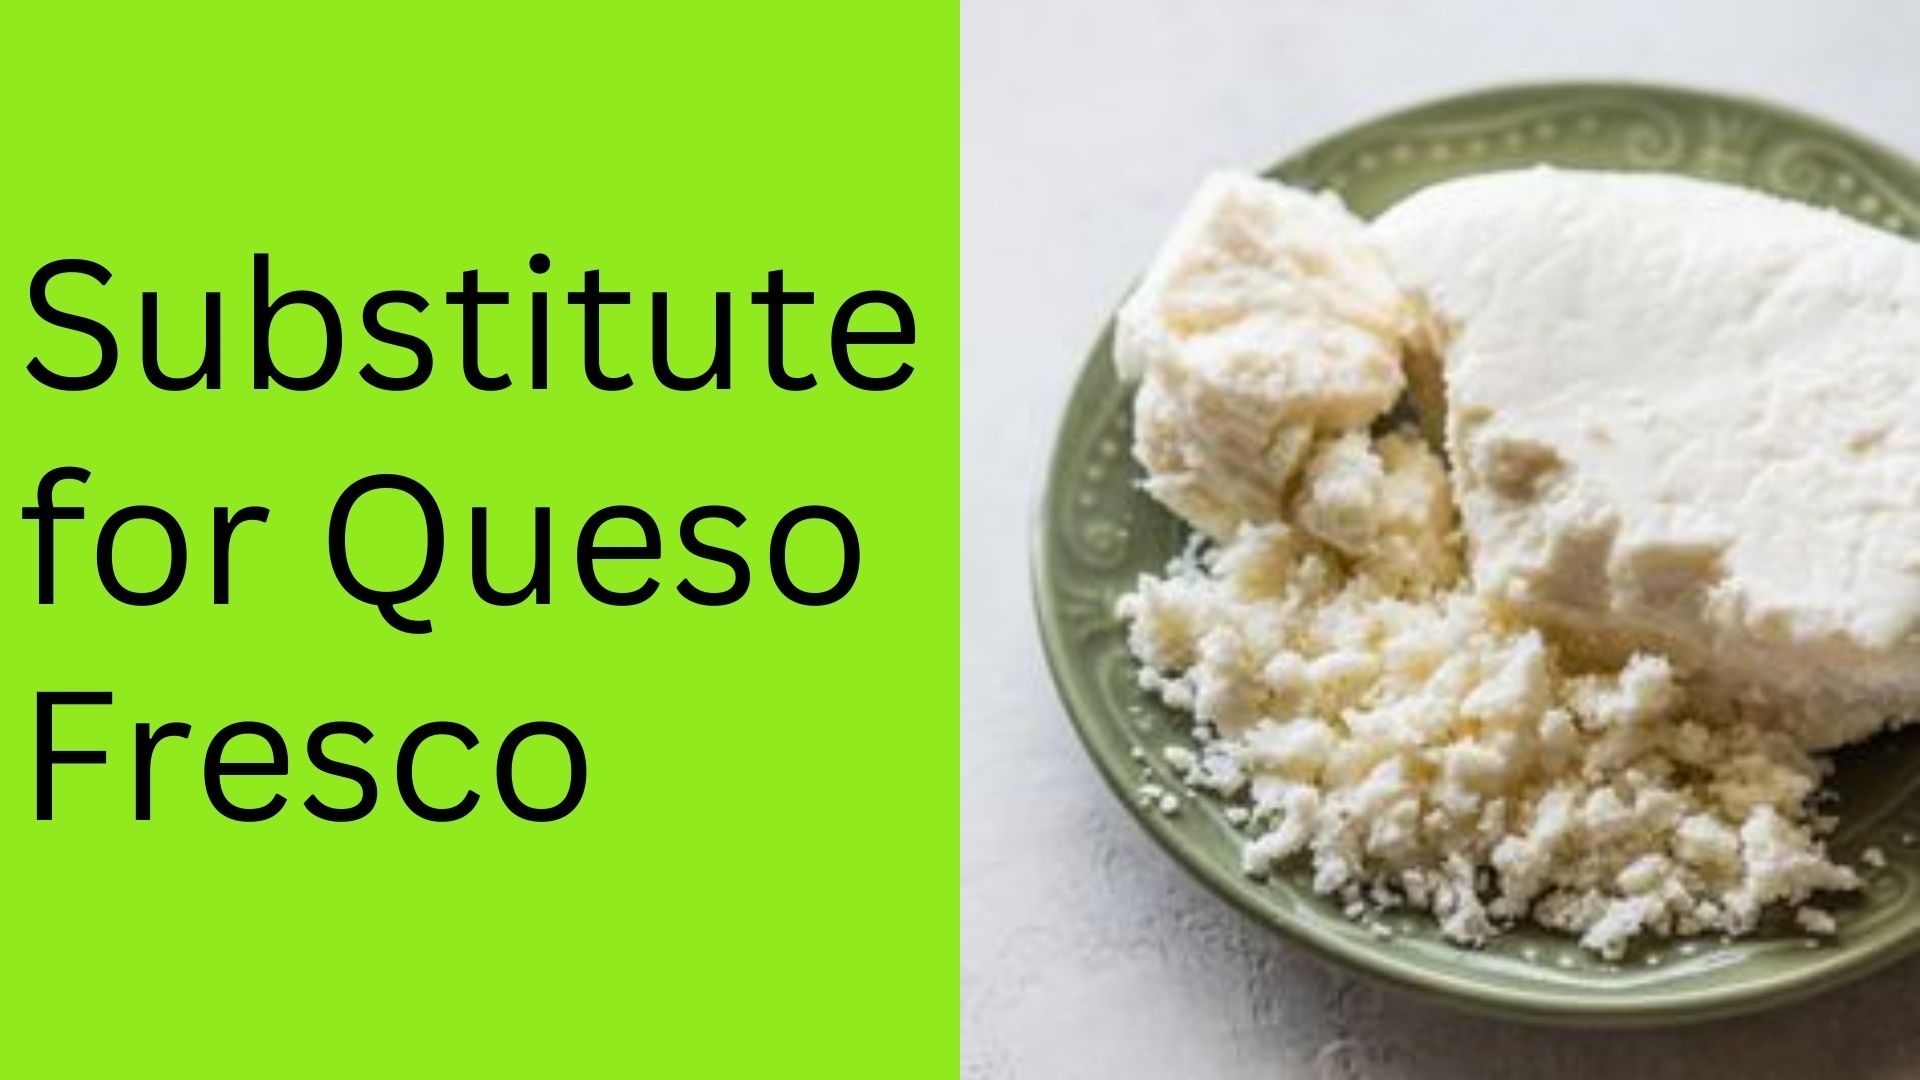 Substitute for Queso Fresco